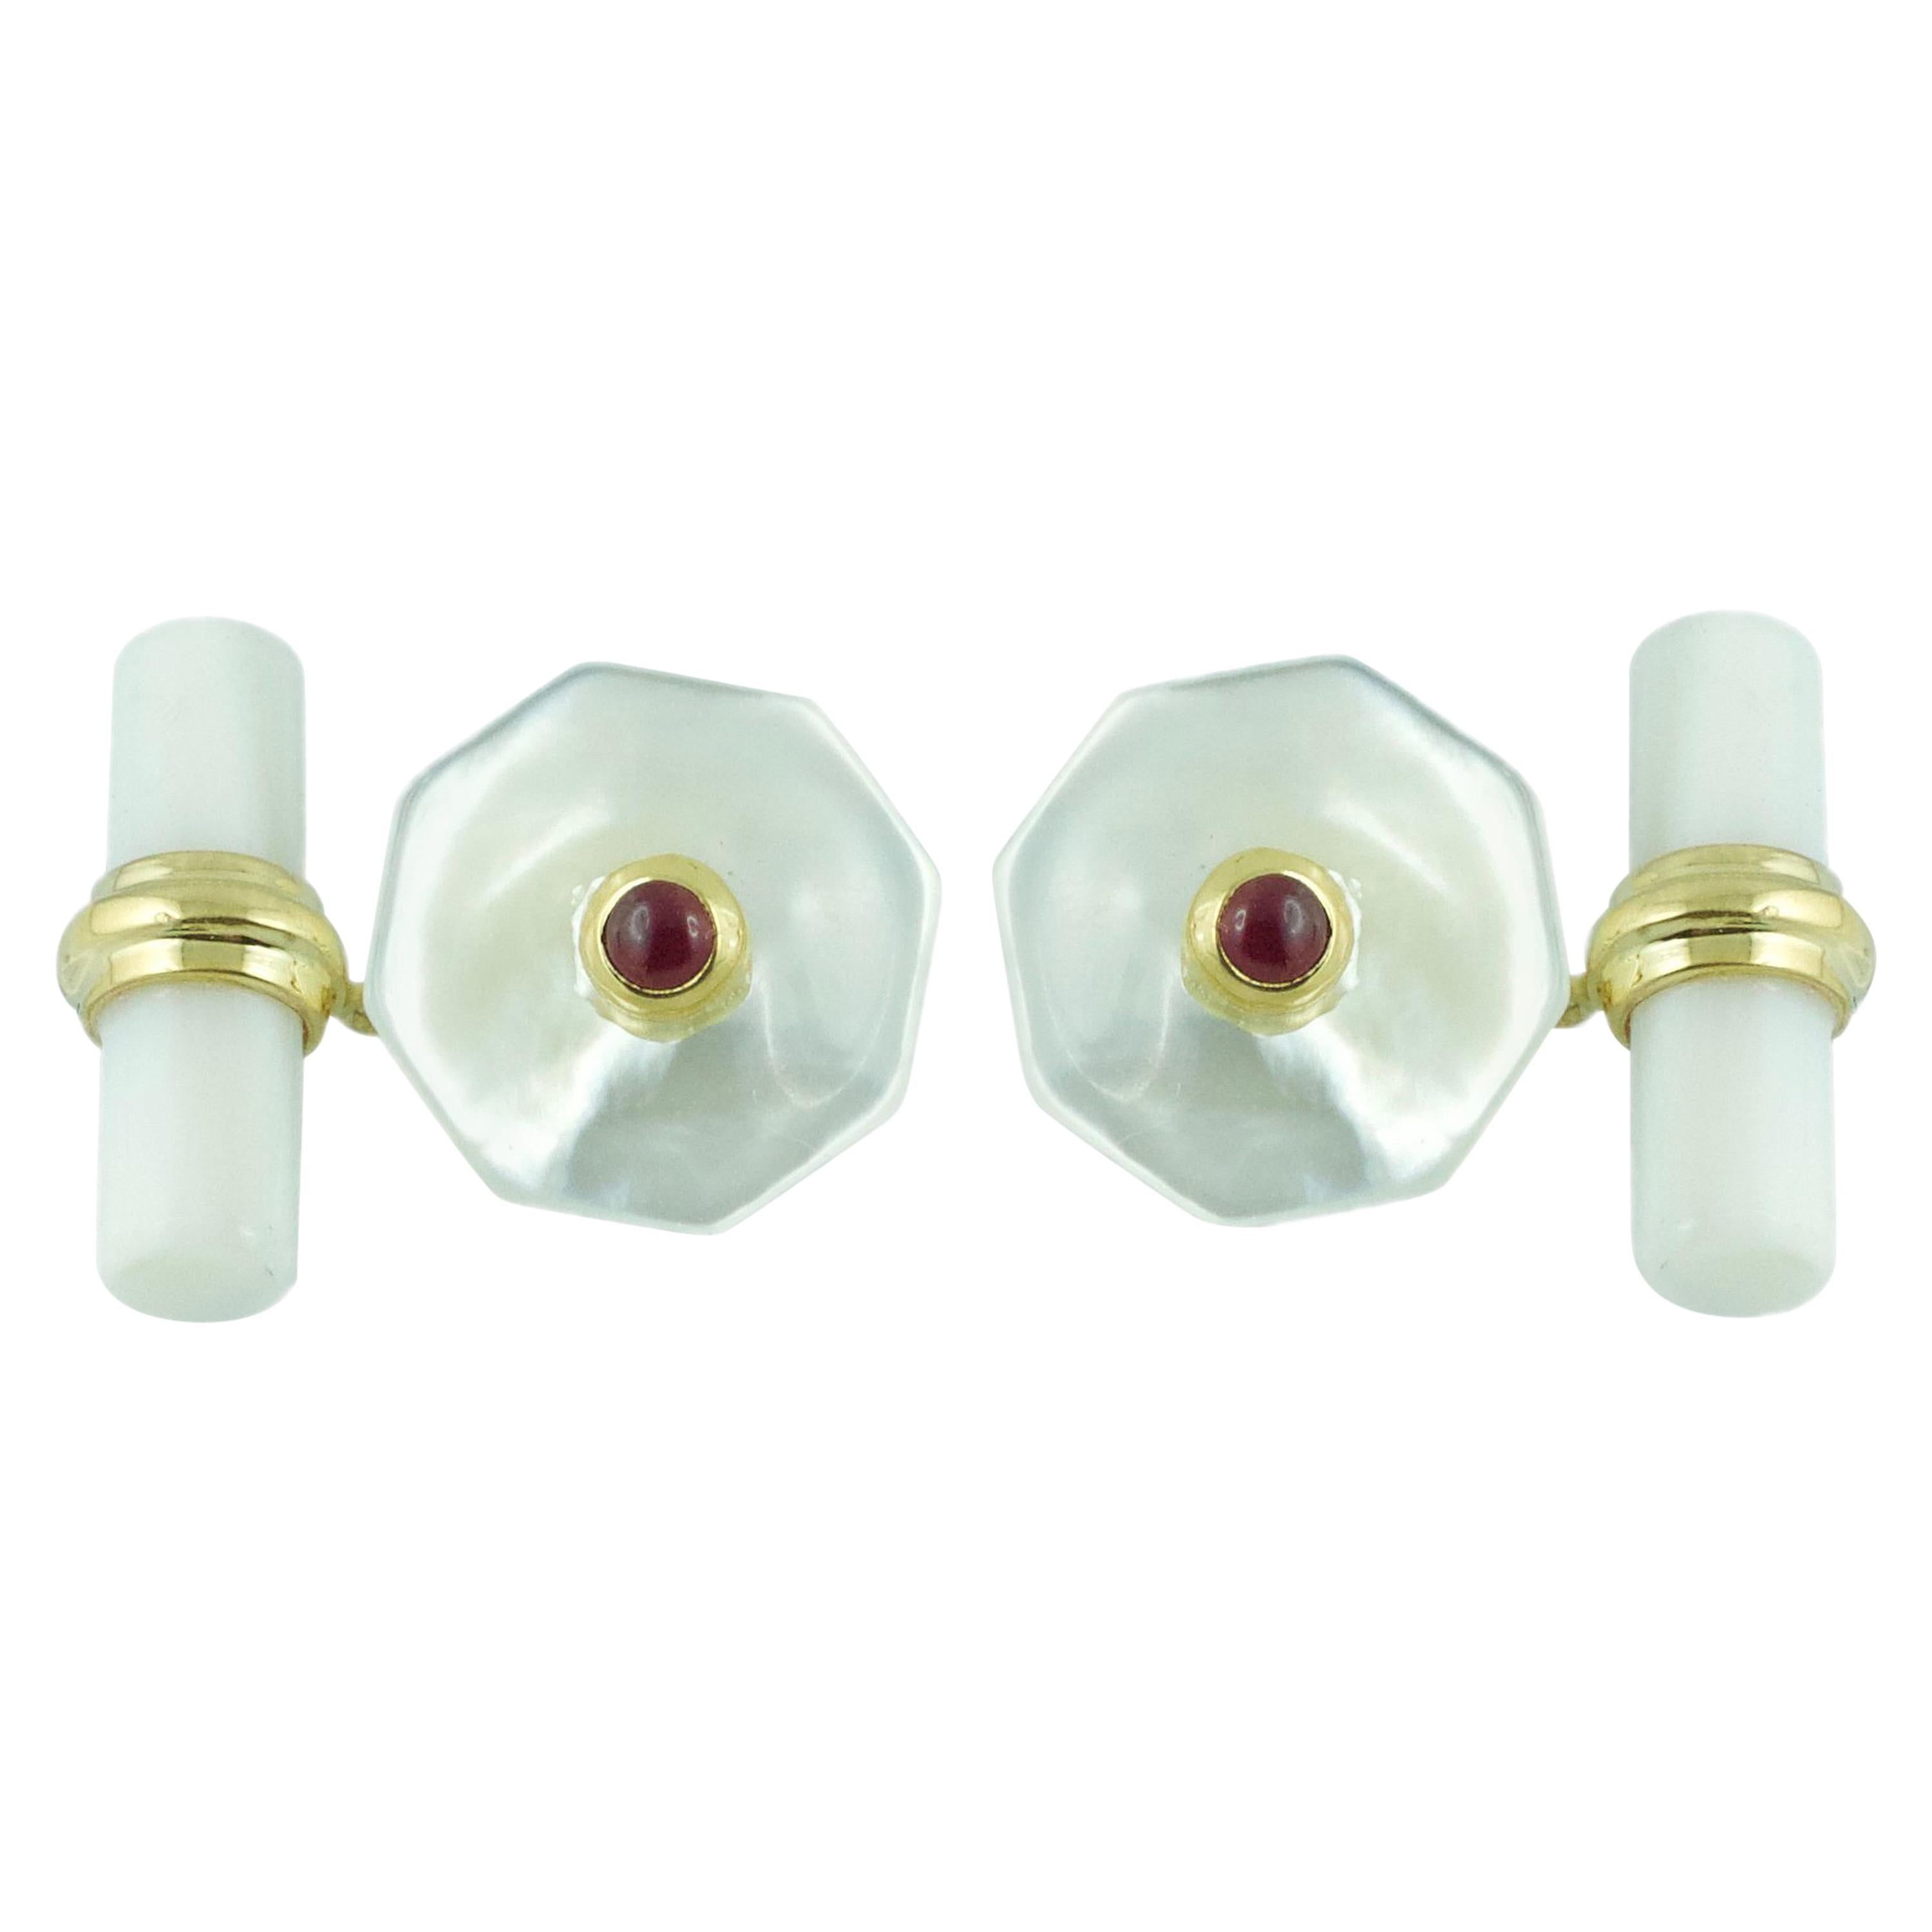 18 Karat Yellow Gold Mother-of-Pearl Cufflinks with Rubies